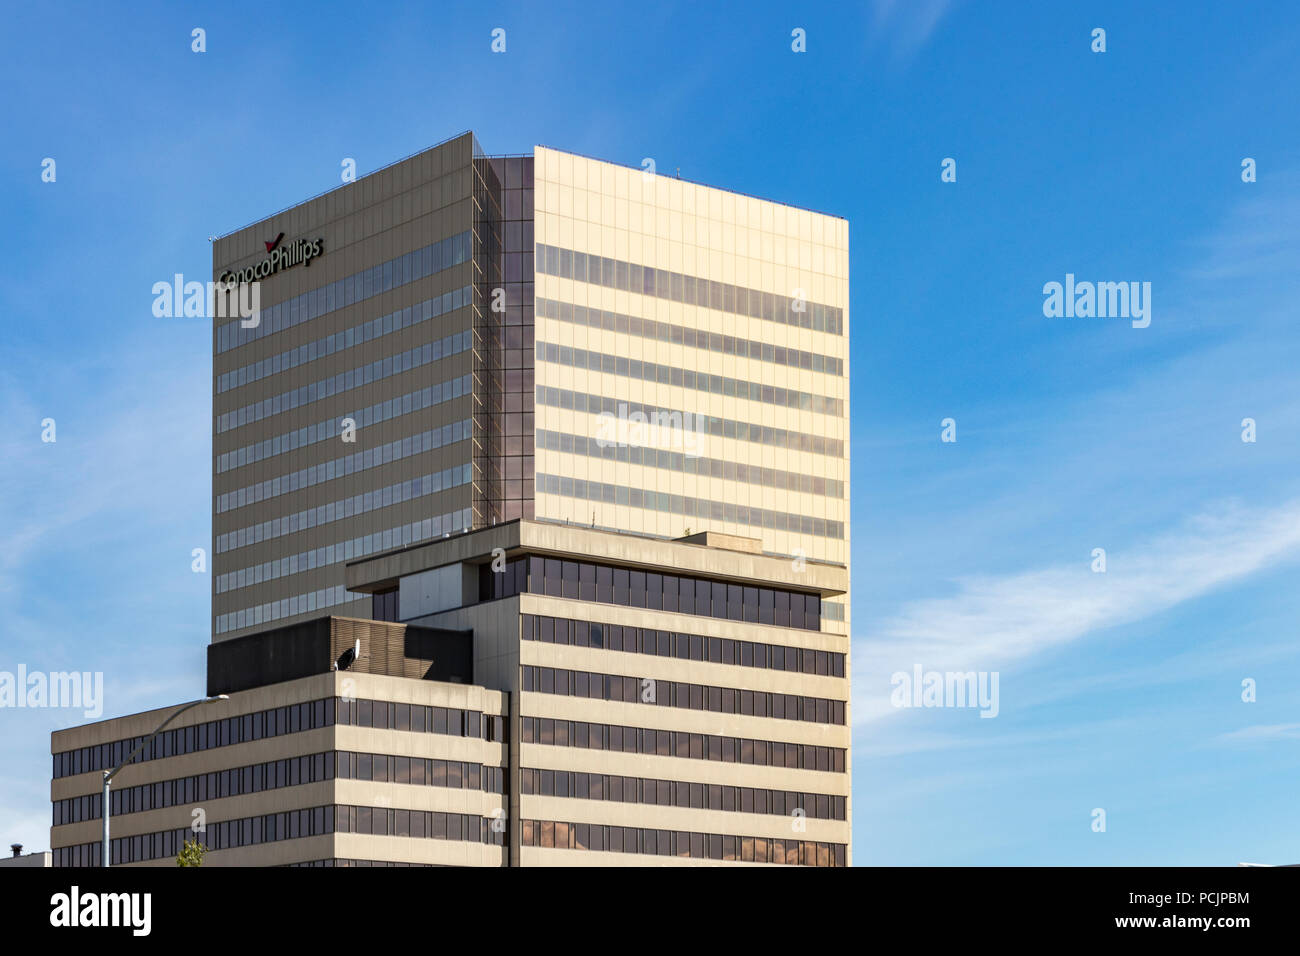 Anchorage, Alaska, USA - July 18, 2018: Anchorage skyline - Conoco Phillips Office Tower Skyscraper in summertime. Stock Photo